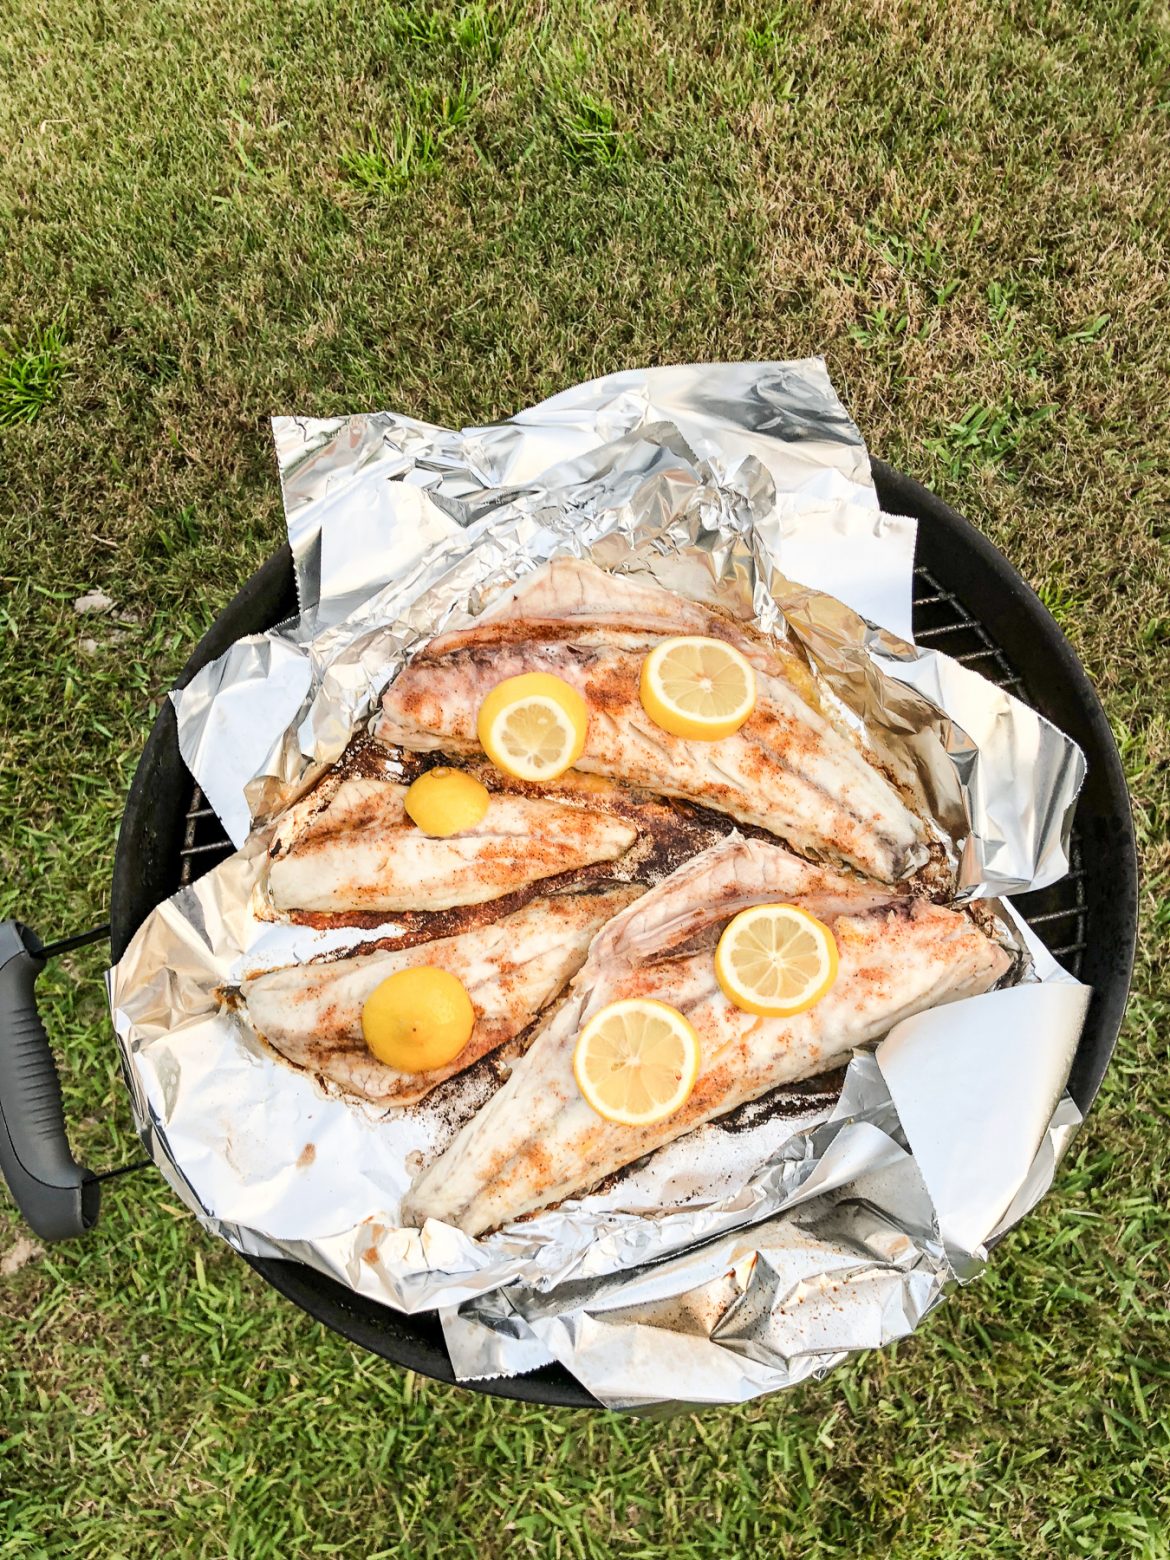 Florida Boy Adventures - Redfish on the Half Shell Grilled